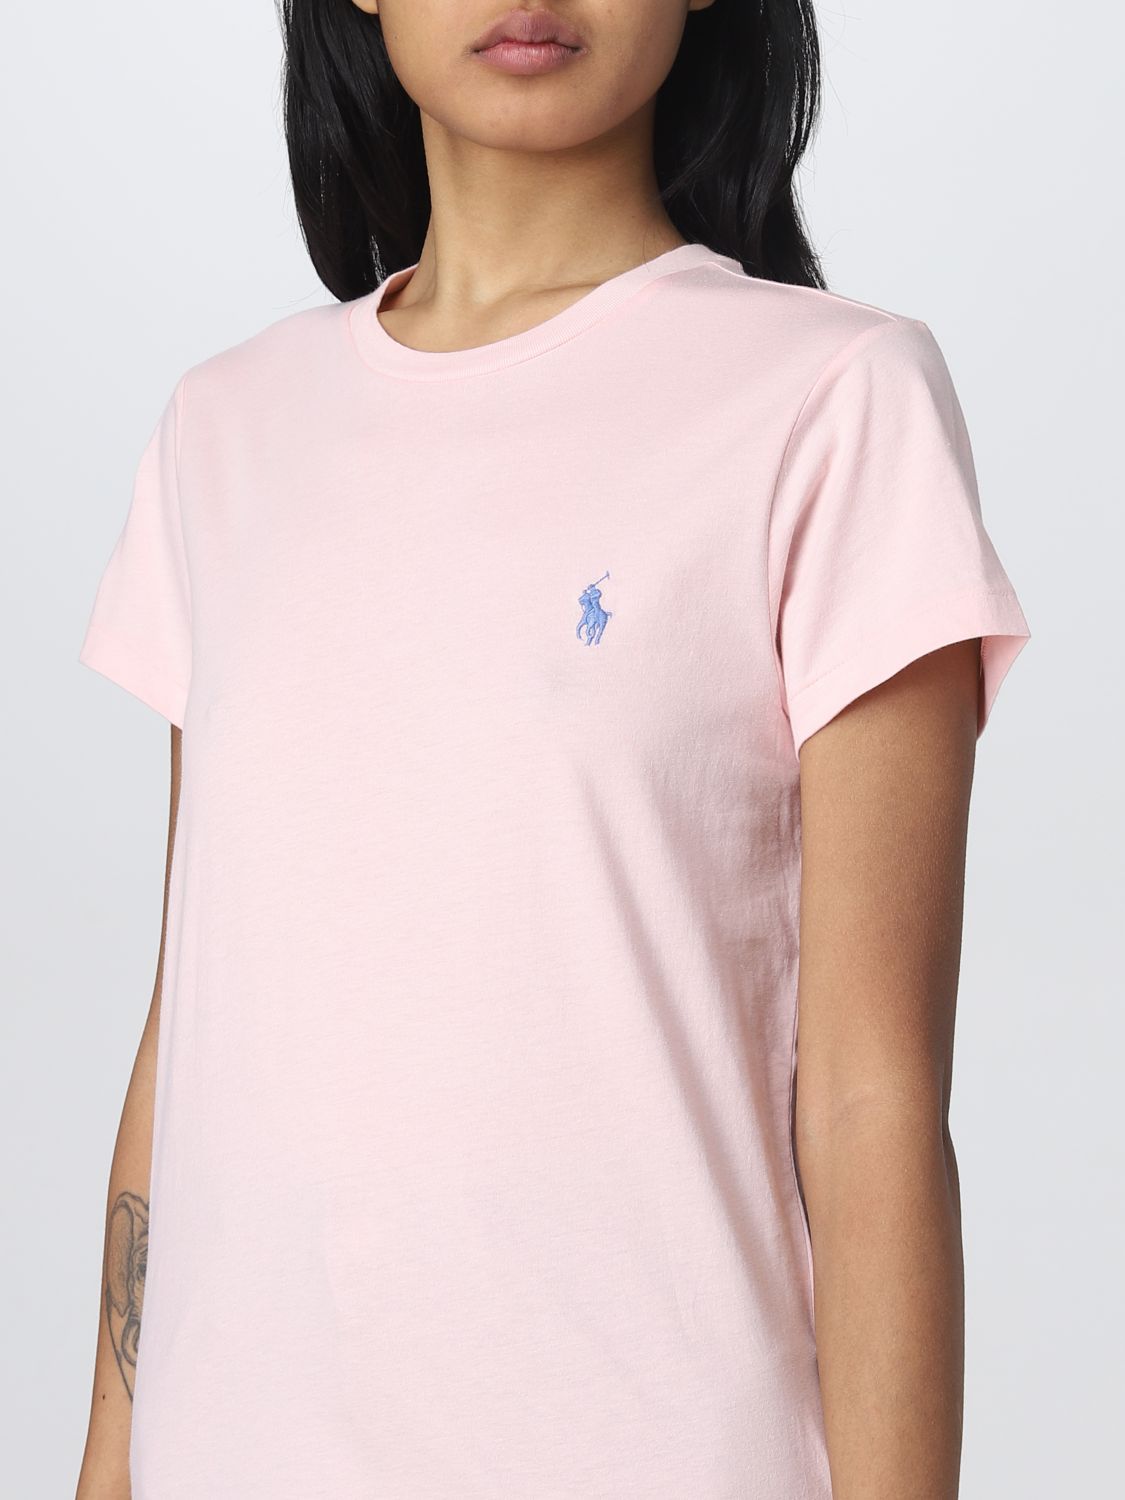 POLO RALPH LAUREN: t-shirt for woman - Pink | Polo Ralph Lauren t-shirt  211898698 online on 